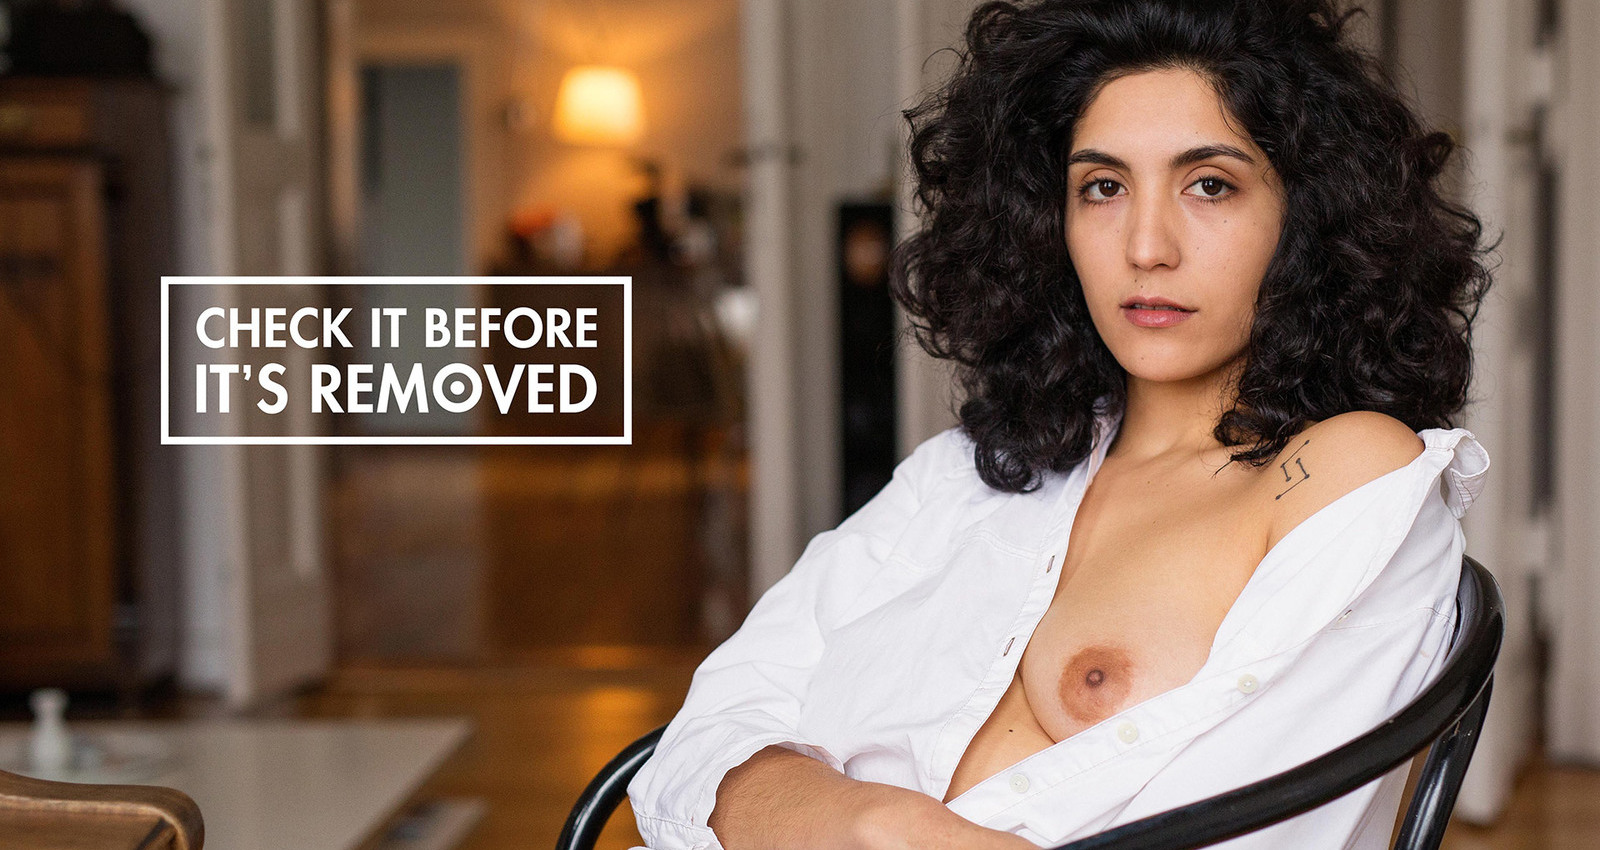 Check it before it's removed: naked breasts on Facebook against breast cancer.